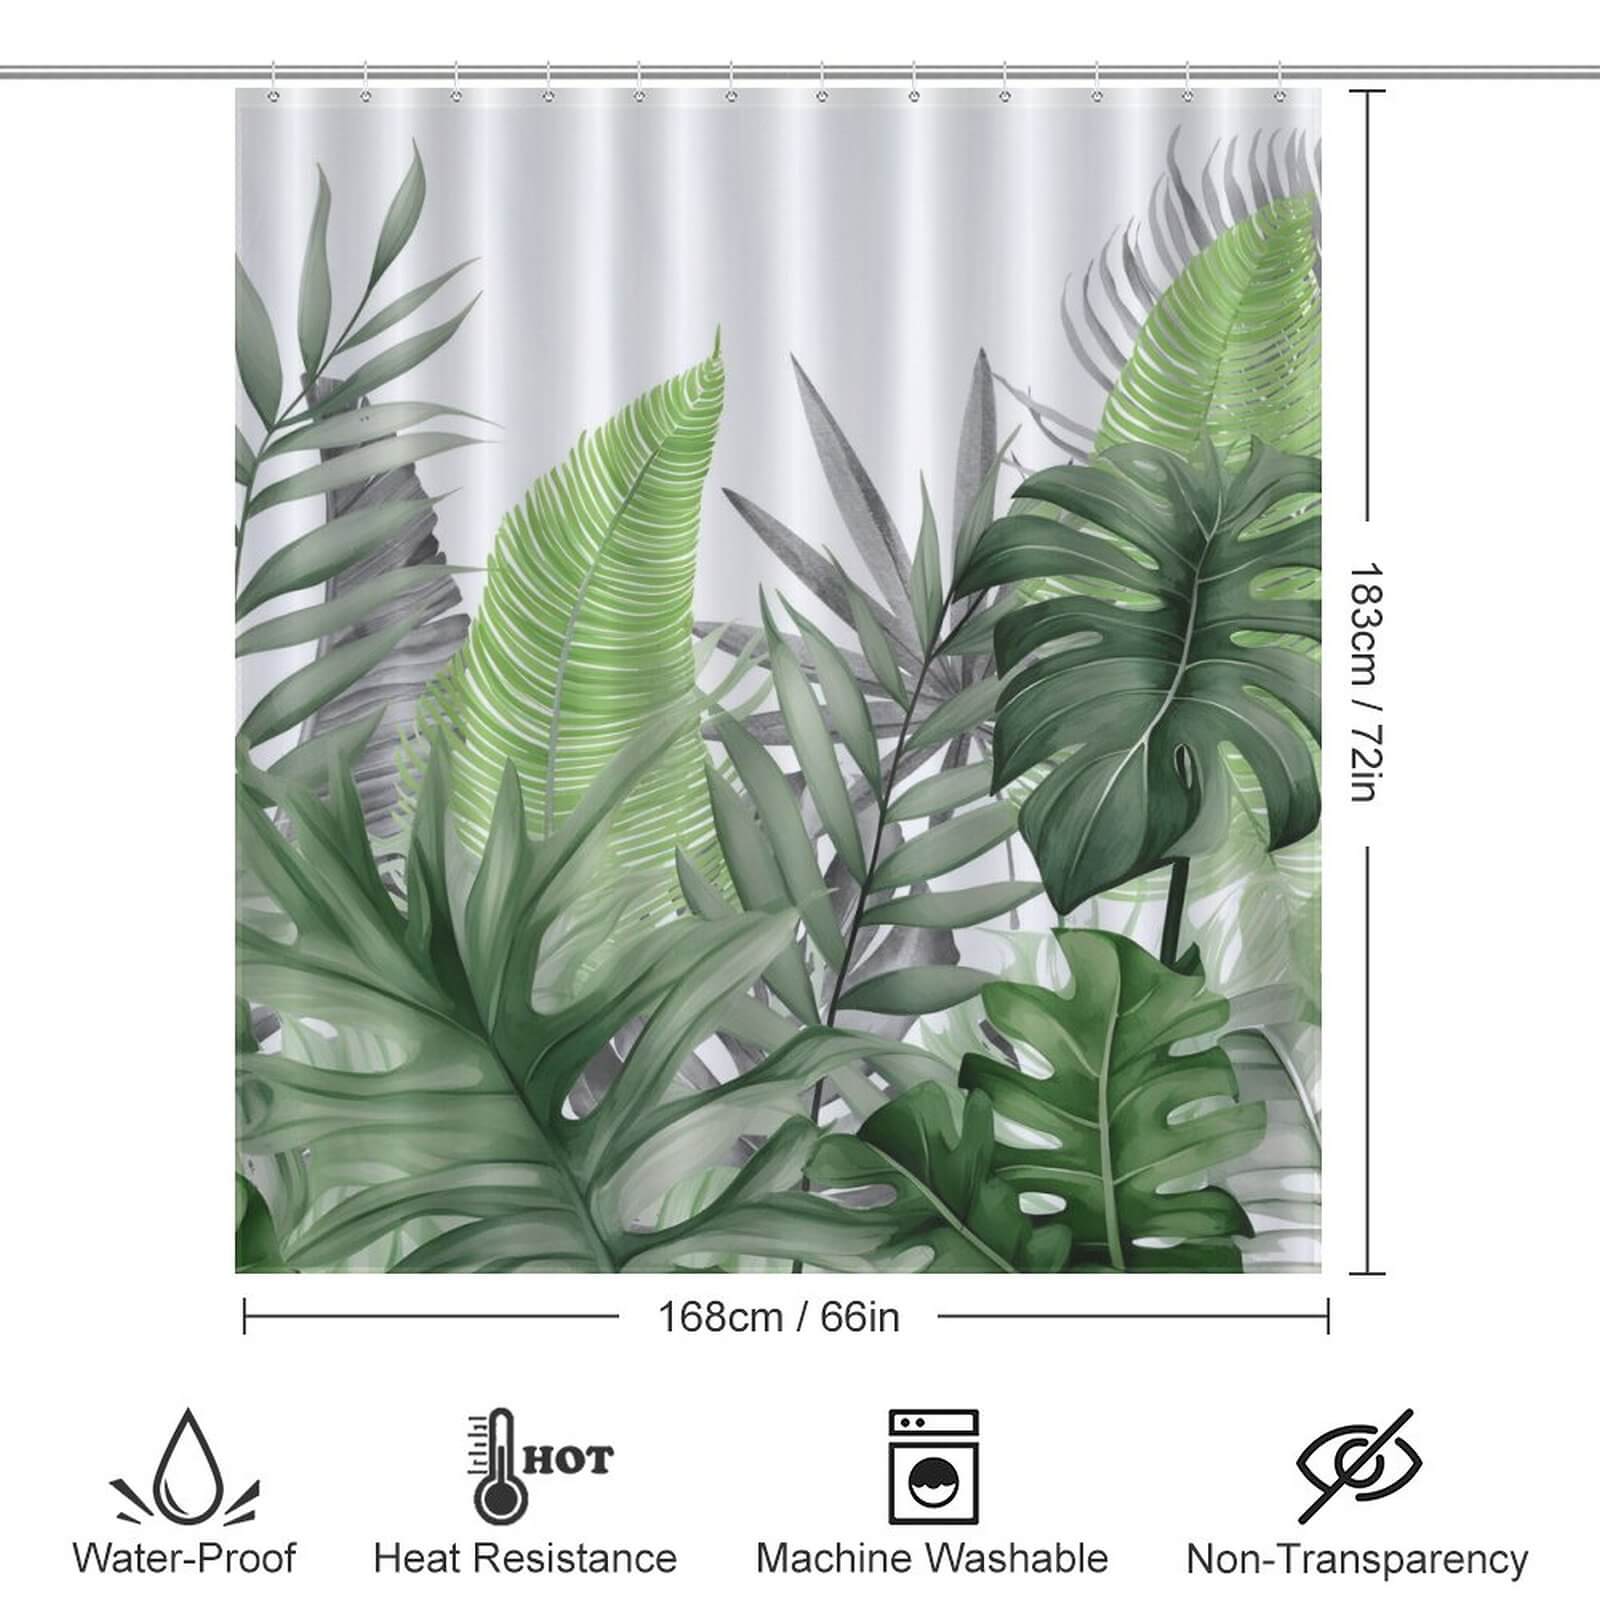 A waterproof Monstera Leaf Jungle shower curtain with Monstera Leaves, measuring at a standard size by Cotton Cat.